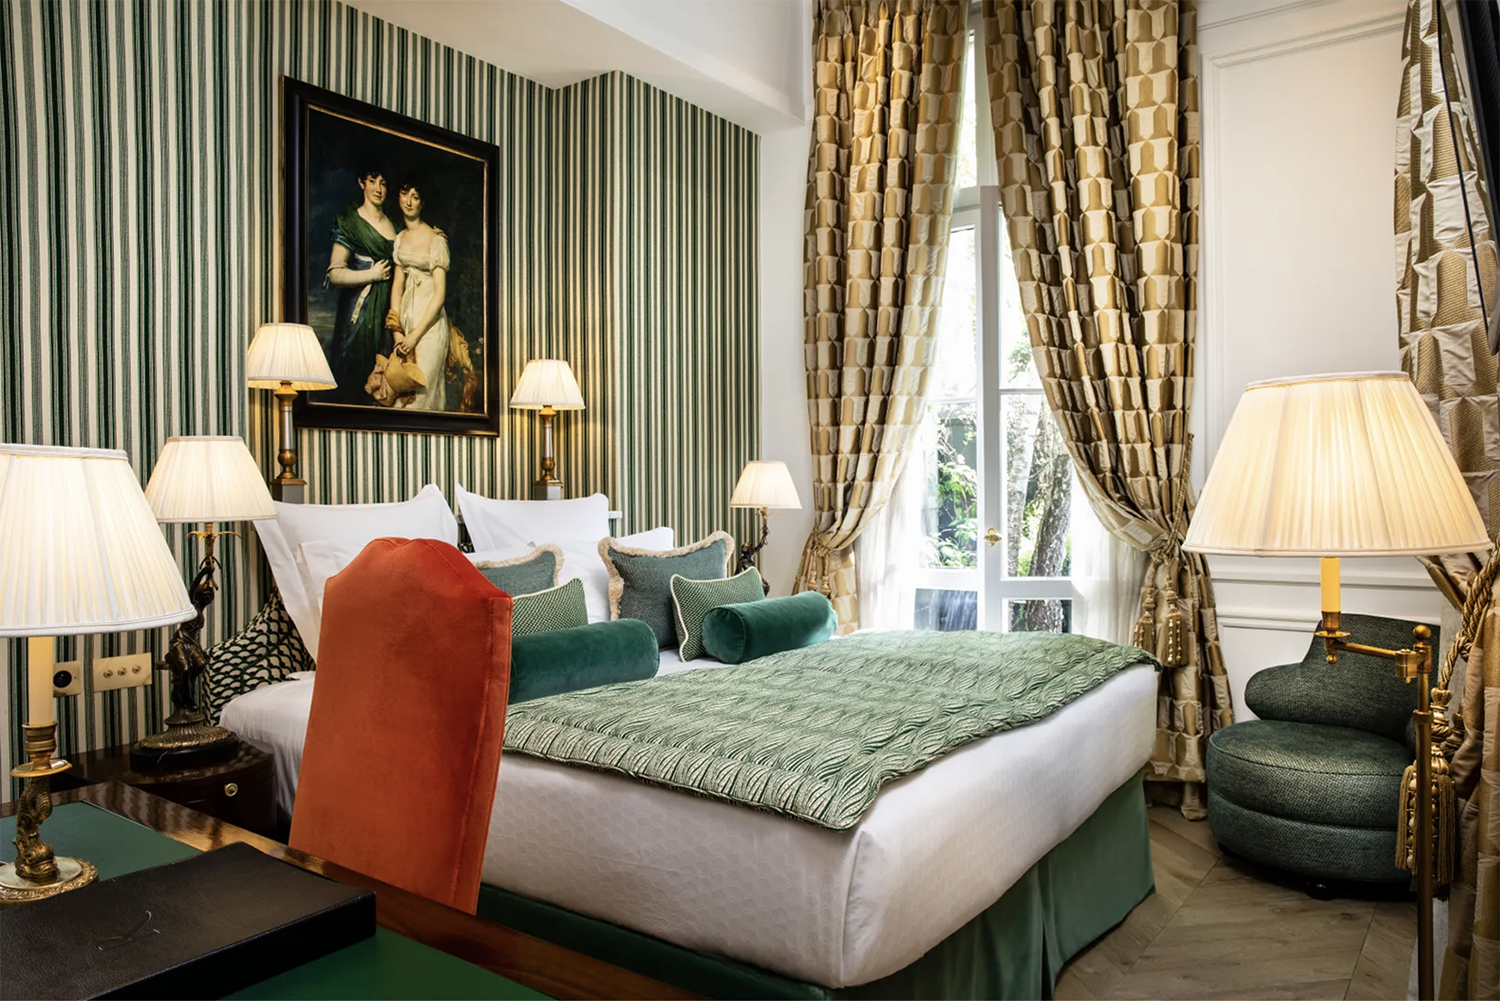 Jewel-toned greens make up the striped wallpaper and screen-printed bedding in one of the Deluxe Rooms at Relais Christine